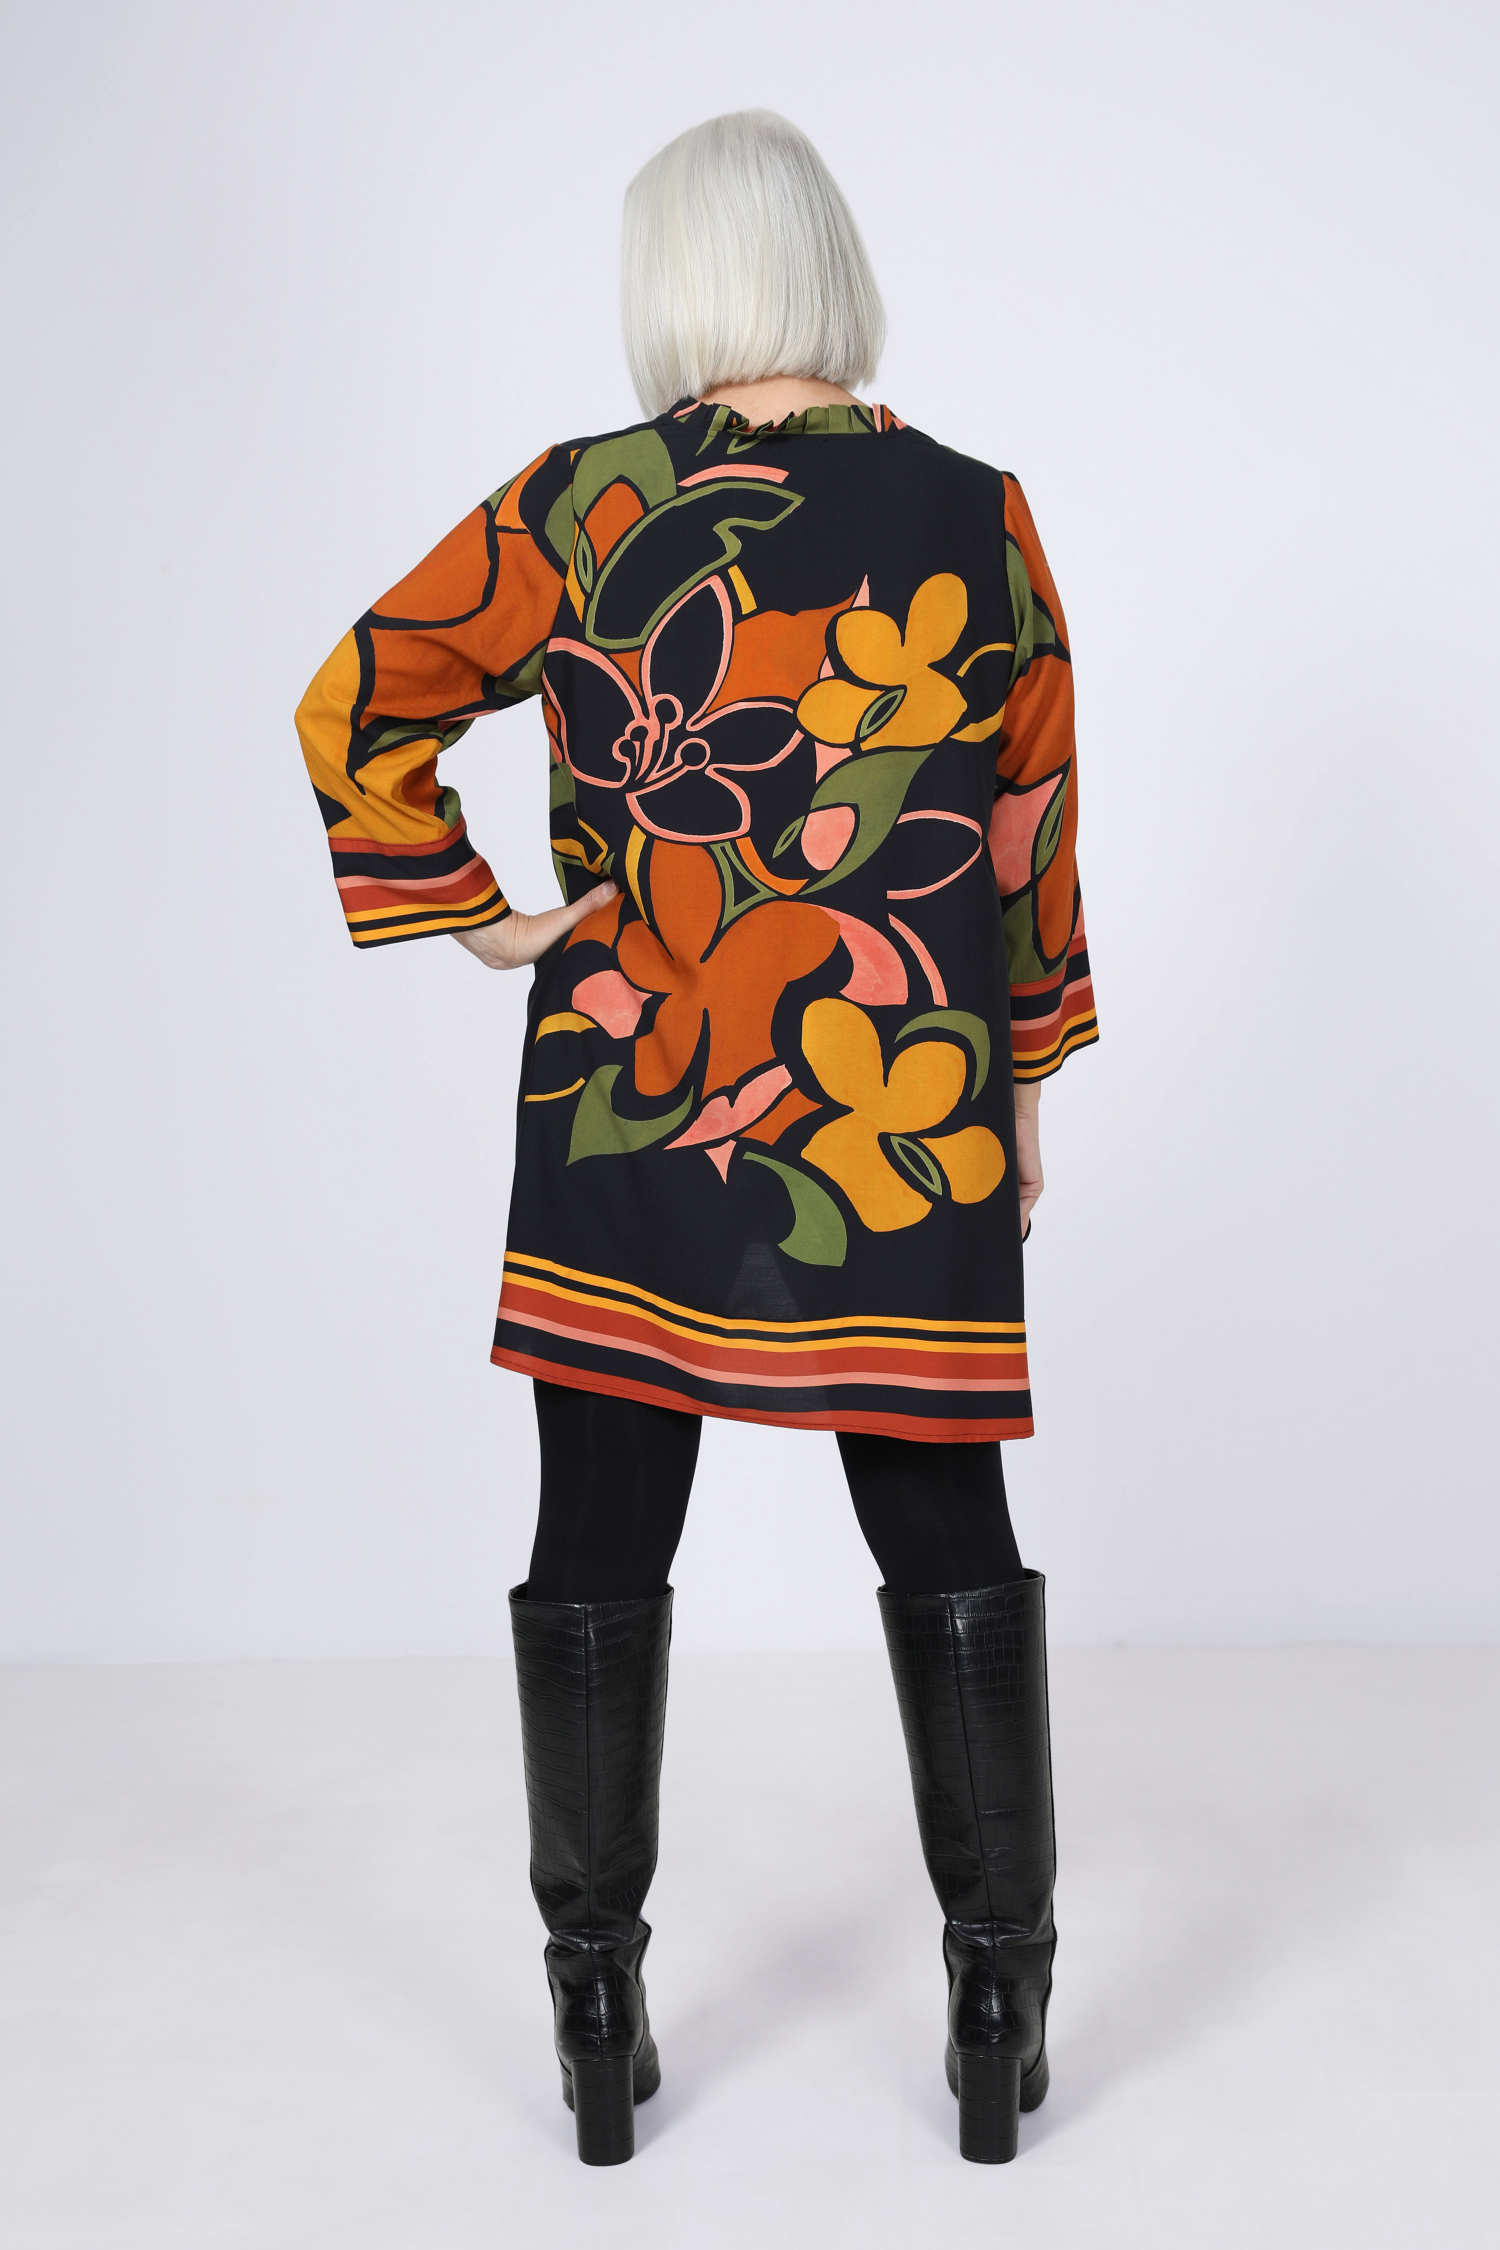 Printed tunic with a basic pattern